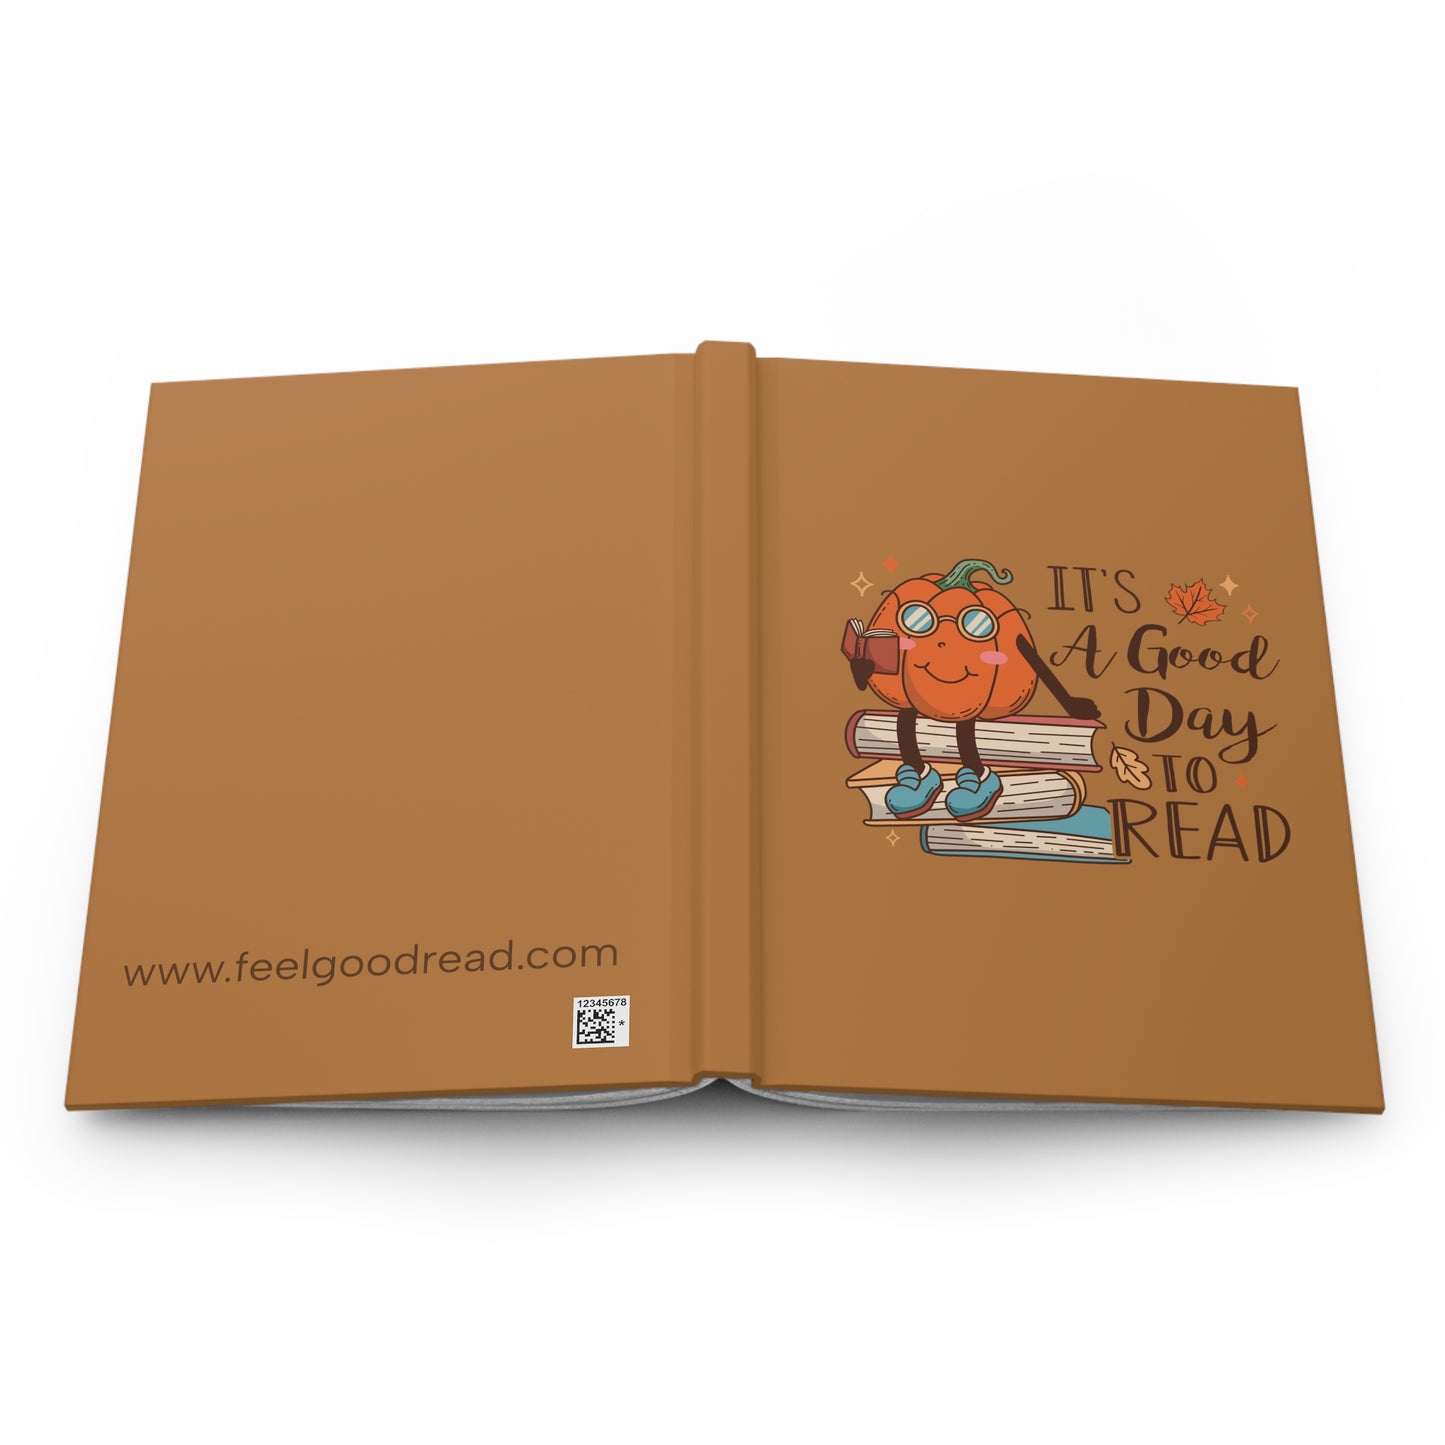 It's a Good Day to Read - Hardcover Journal Matte